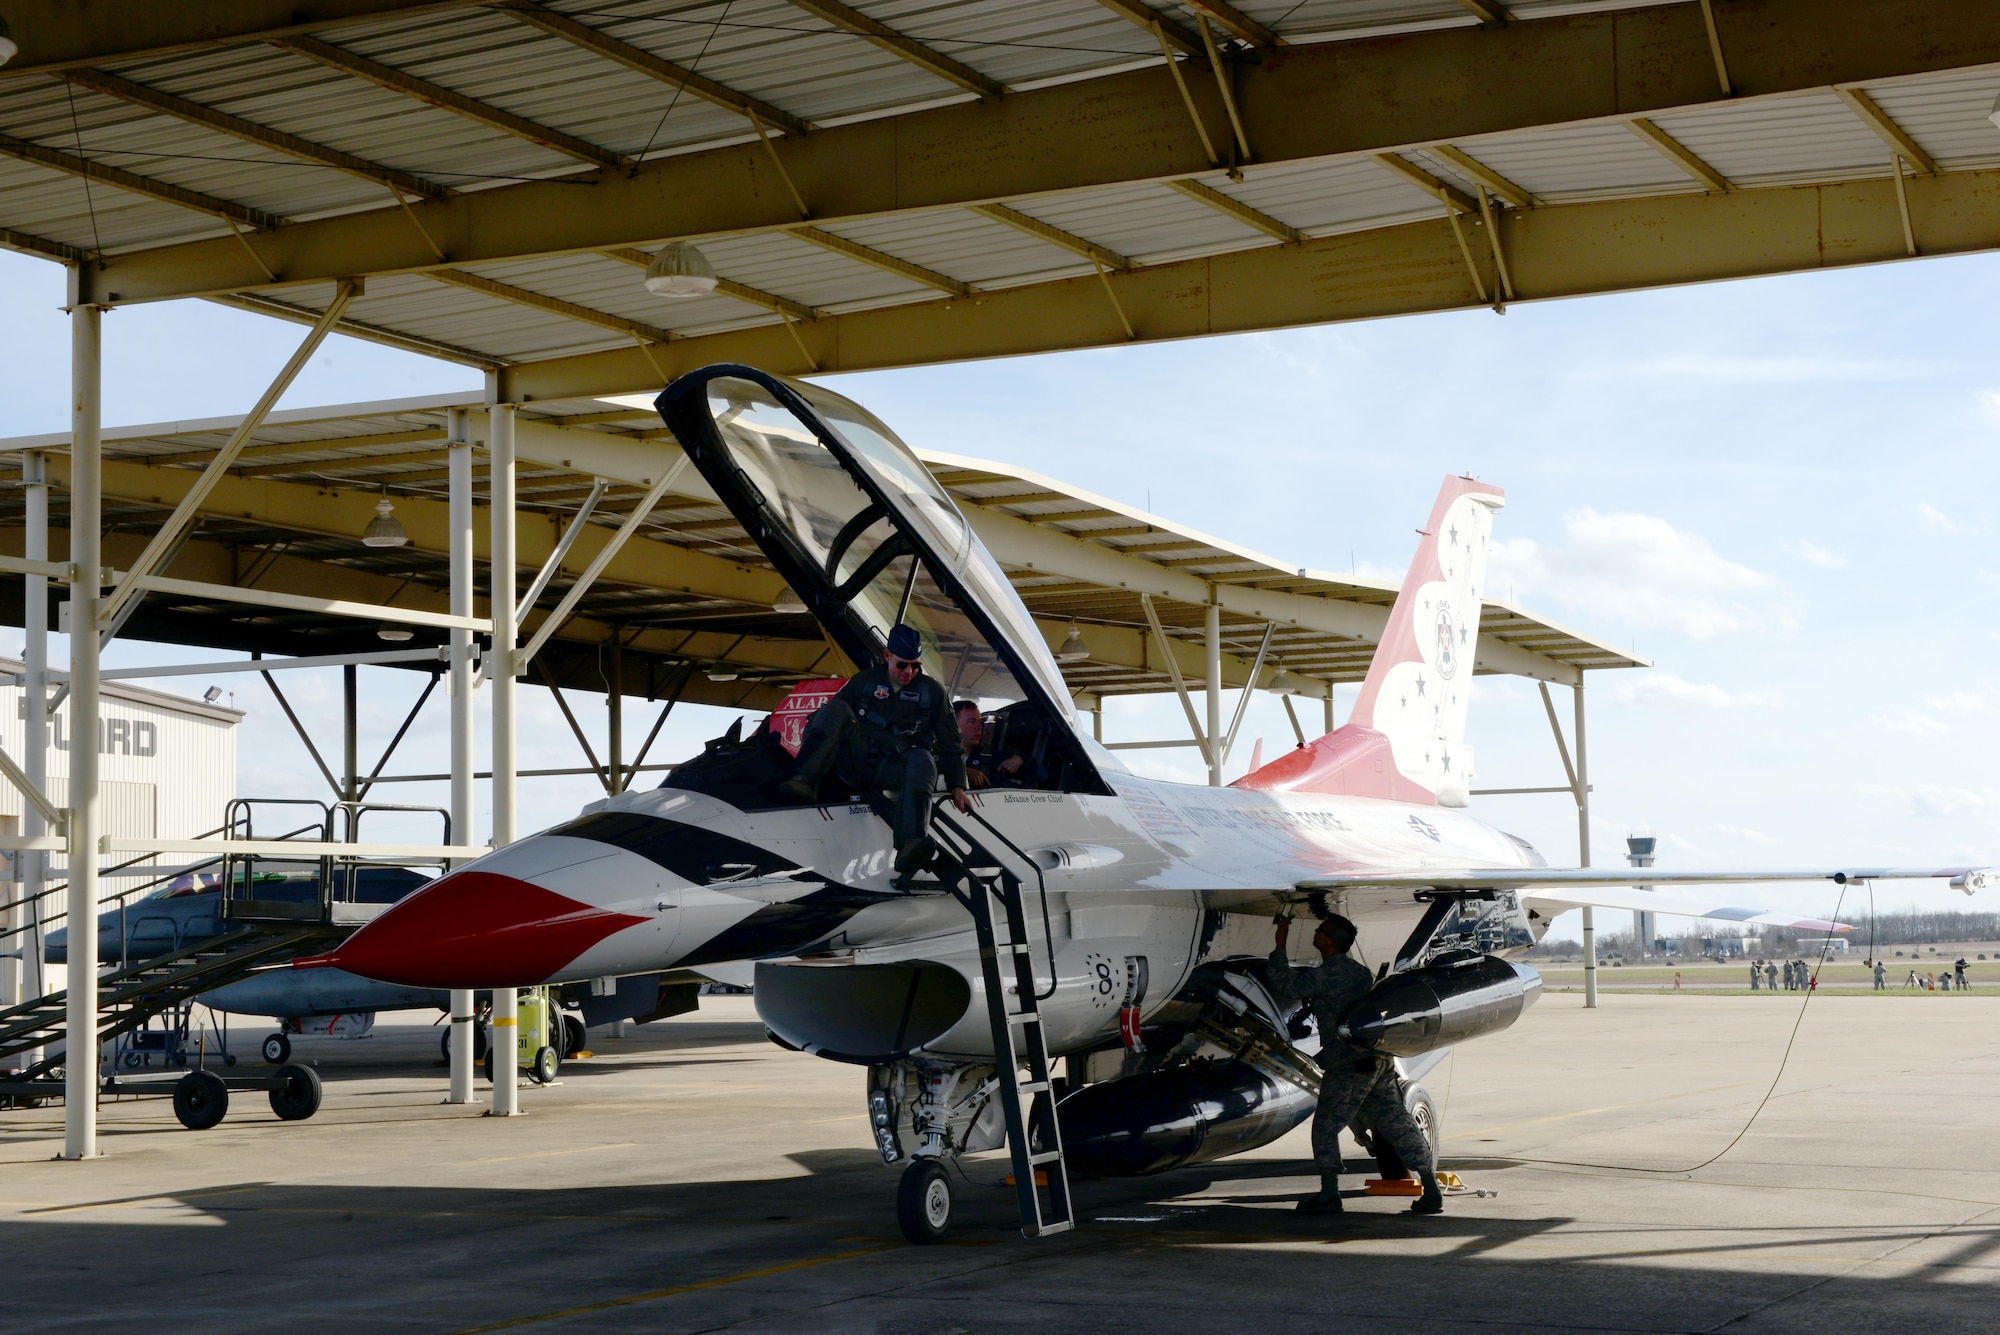 Capt. Erik Gonsalves, U.S. Air Force Thunderbird pilot, arrives on Dannelly Field at the Montgomery Regional Airport in an F-16D Thunderbird, Jan. 25, 2017. Before landing, Gonsalves conducted a flight survey of Maxwell Air Force Base and the surrounding area for the upcoming Air Show in April. (U.S. Air Force photo/Senior Airman Tammie Ramsouer)